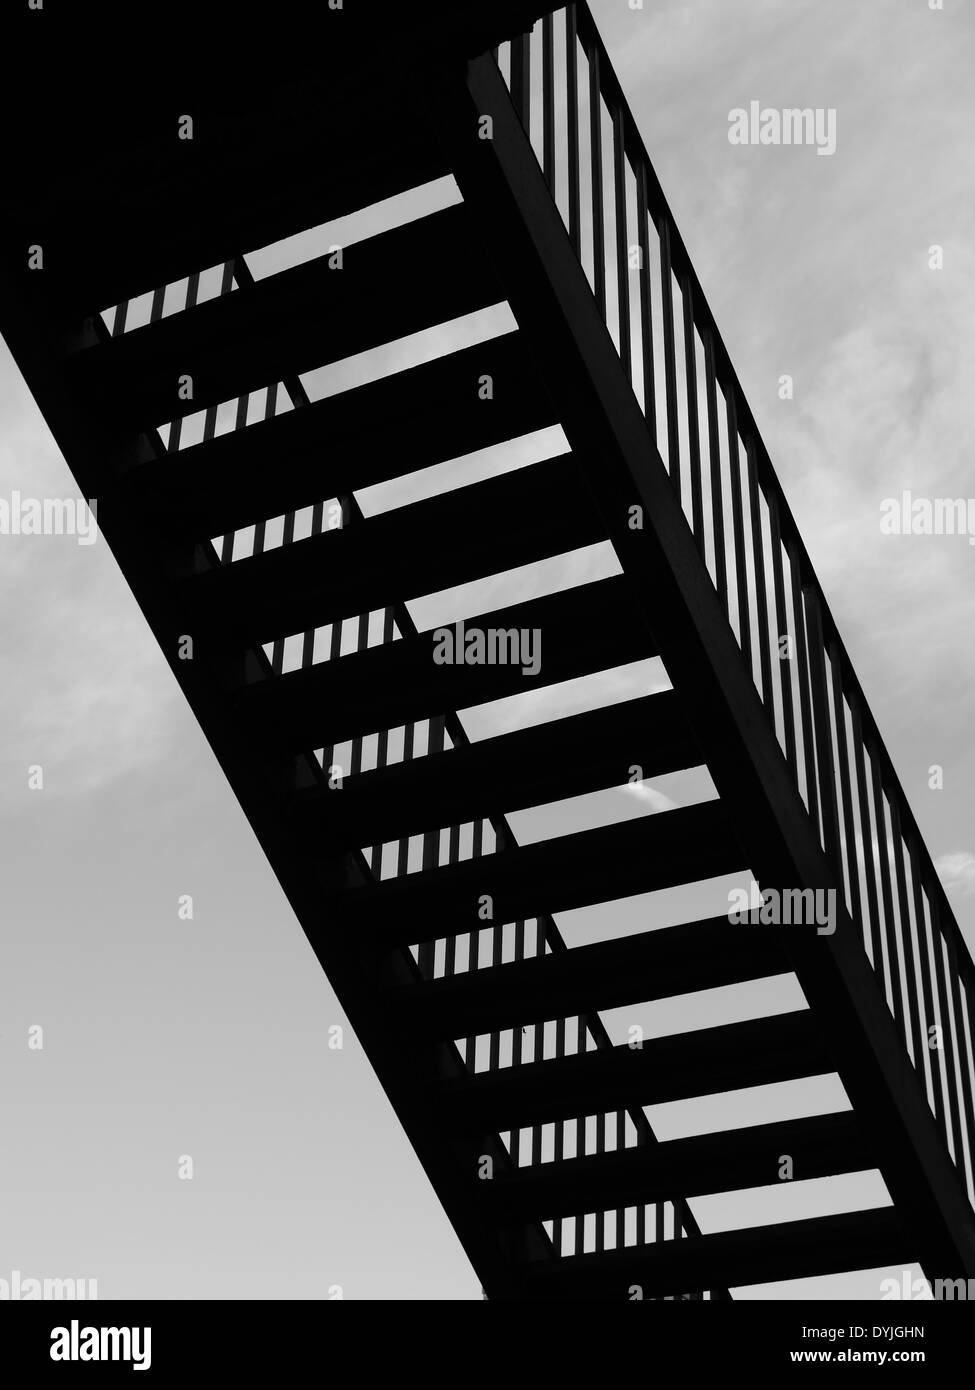 Abstract image of metal staircase in silhouette - art / creative style Stock Photo